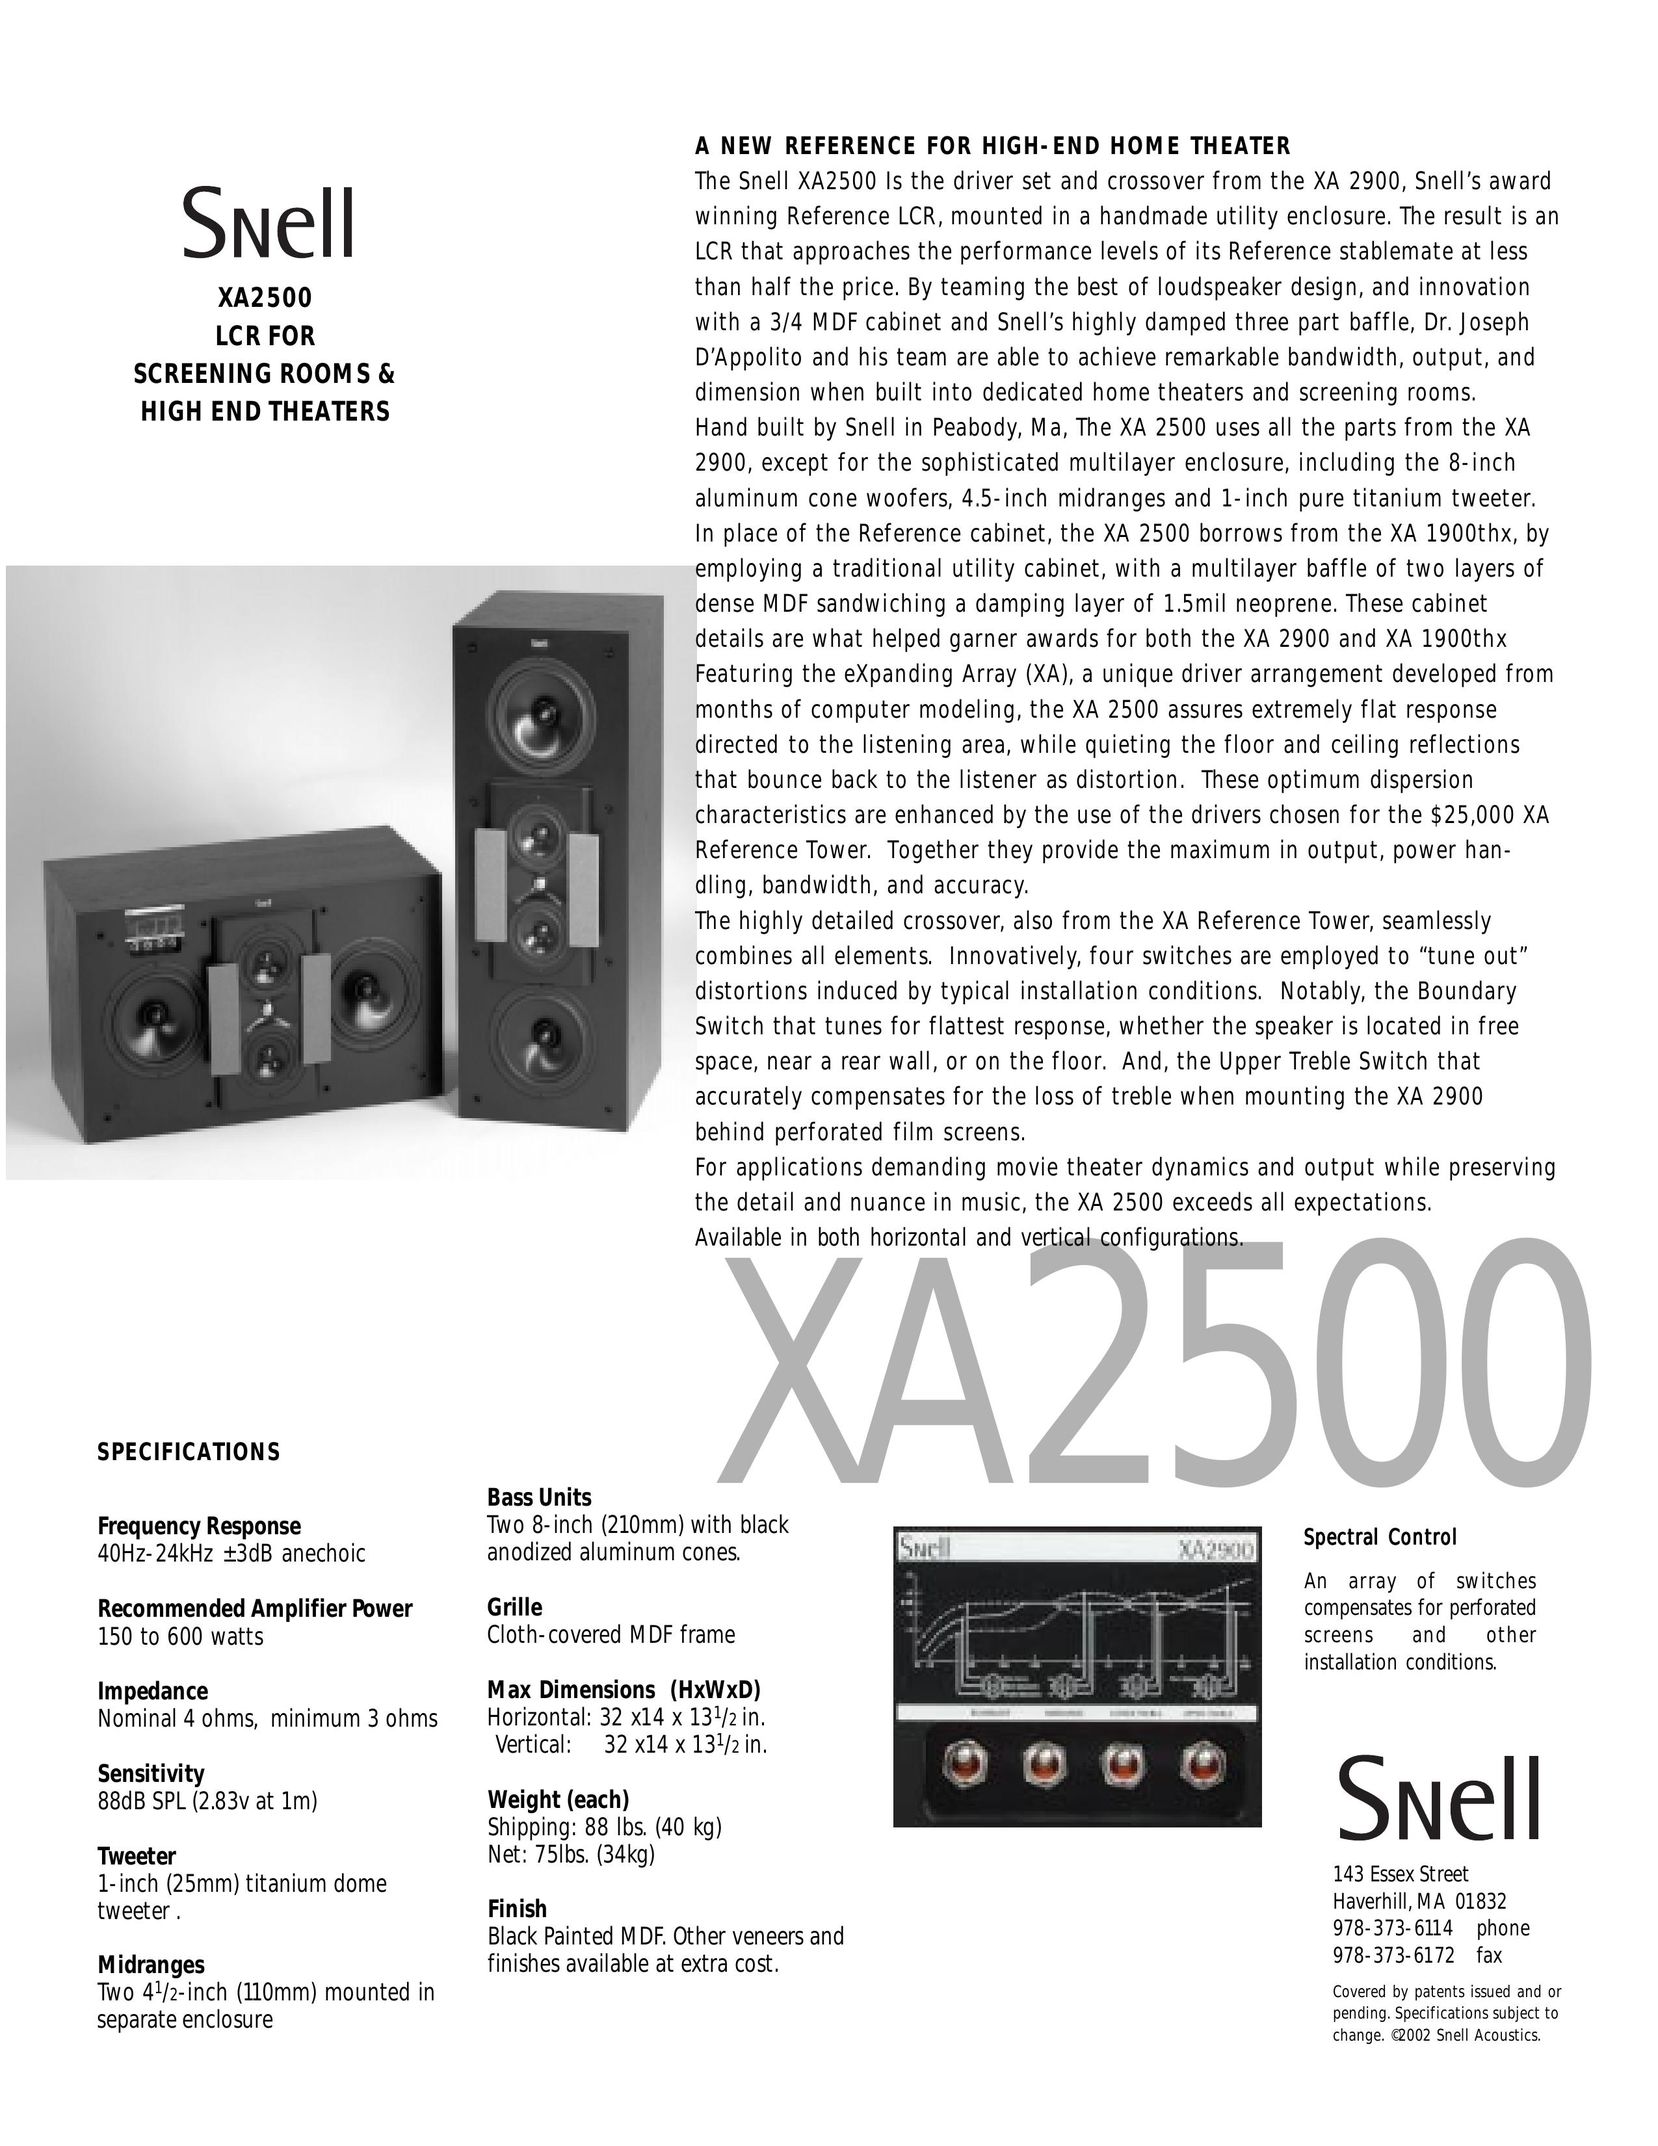 Snell Acoustics XA 2500 Home Theater System User Manual